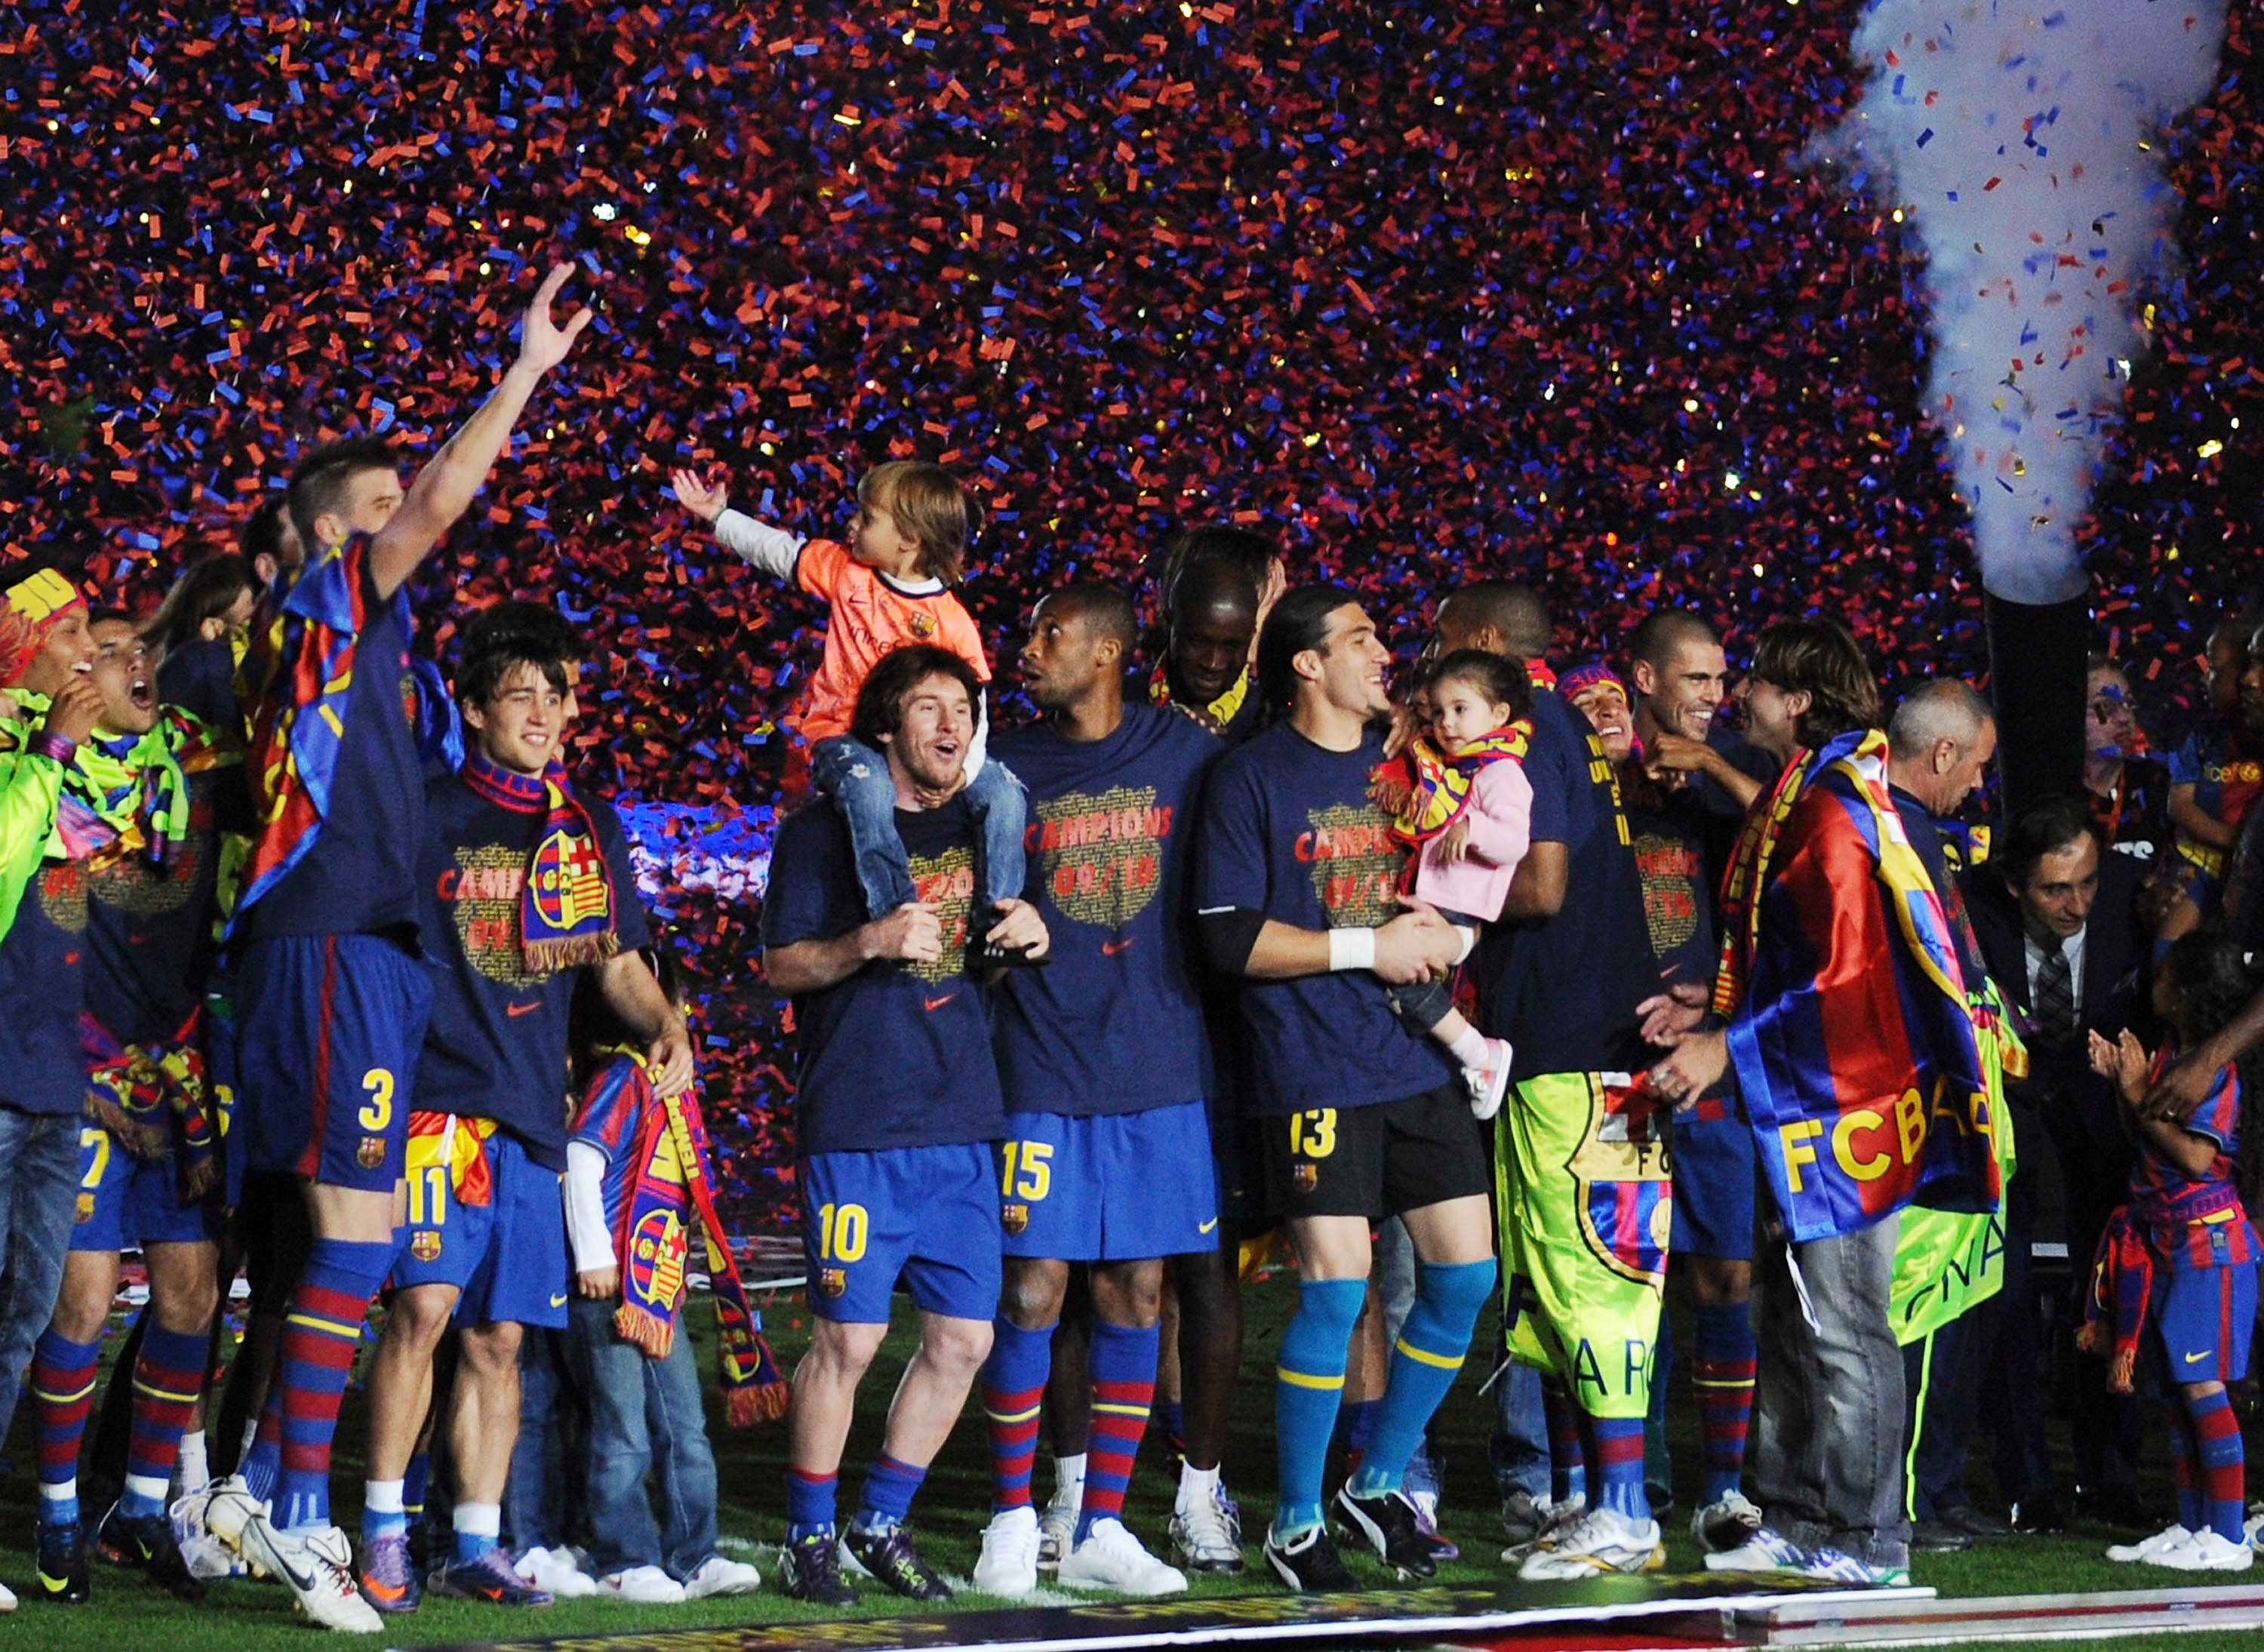 BARCELONA, SPAIN - MAY 16:  Leo Messi (#10) of Barcelona celebrates with teamates after Barcelona beat Real Valladolid 4-0 to clinch La Liga title after their match at Camp Nou stadium on May 16, 2010 in Barcelona, Spain.  (Photo by Denis Doyle/Getty Imag